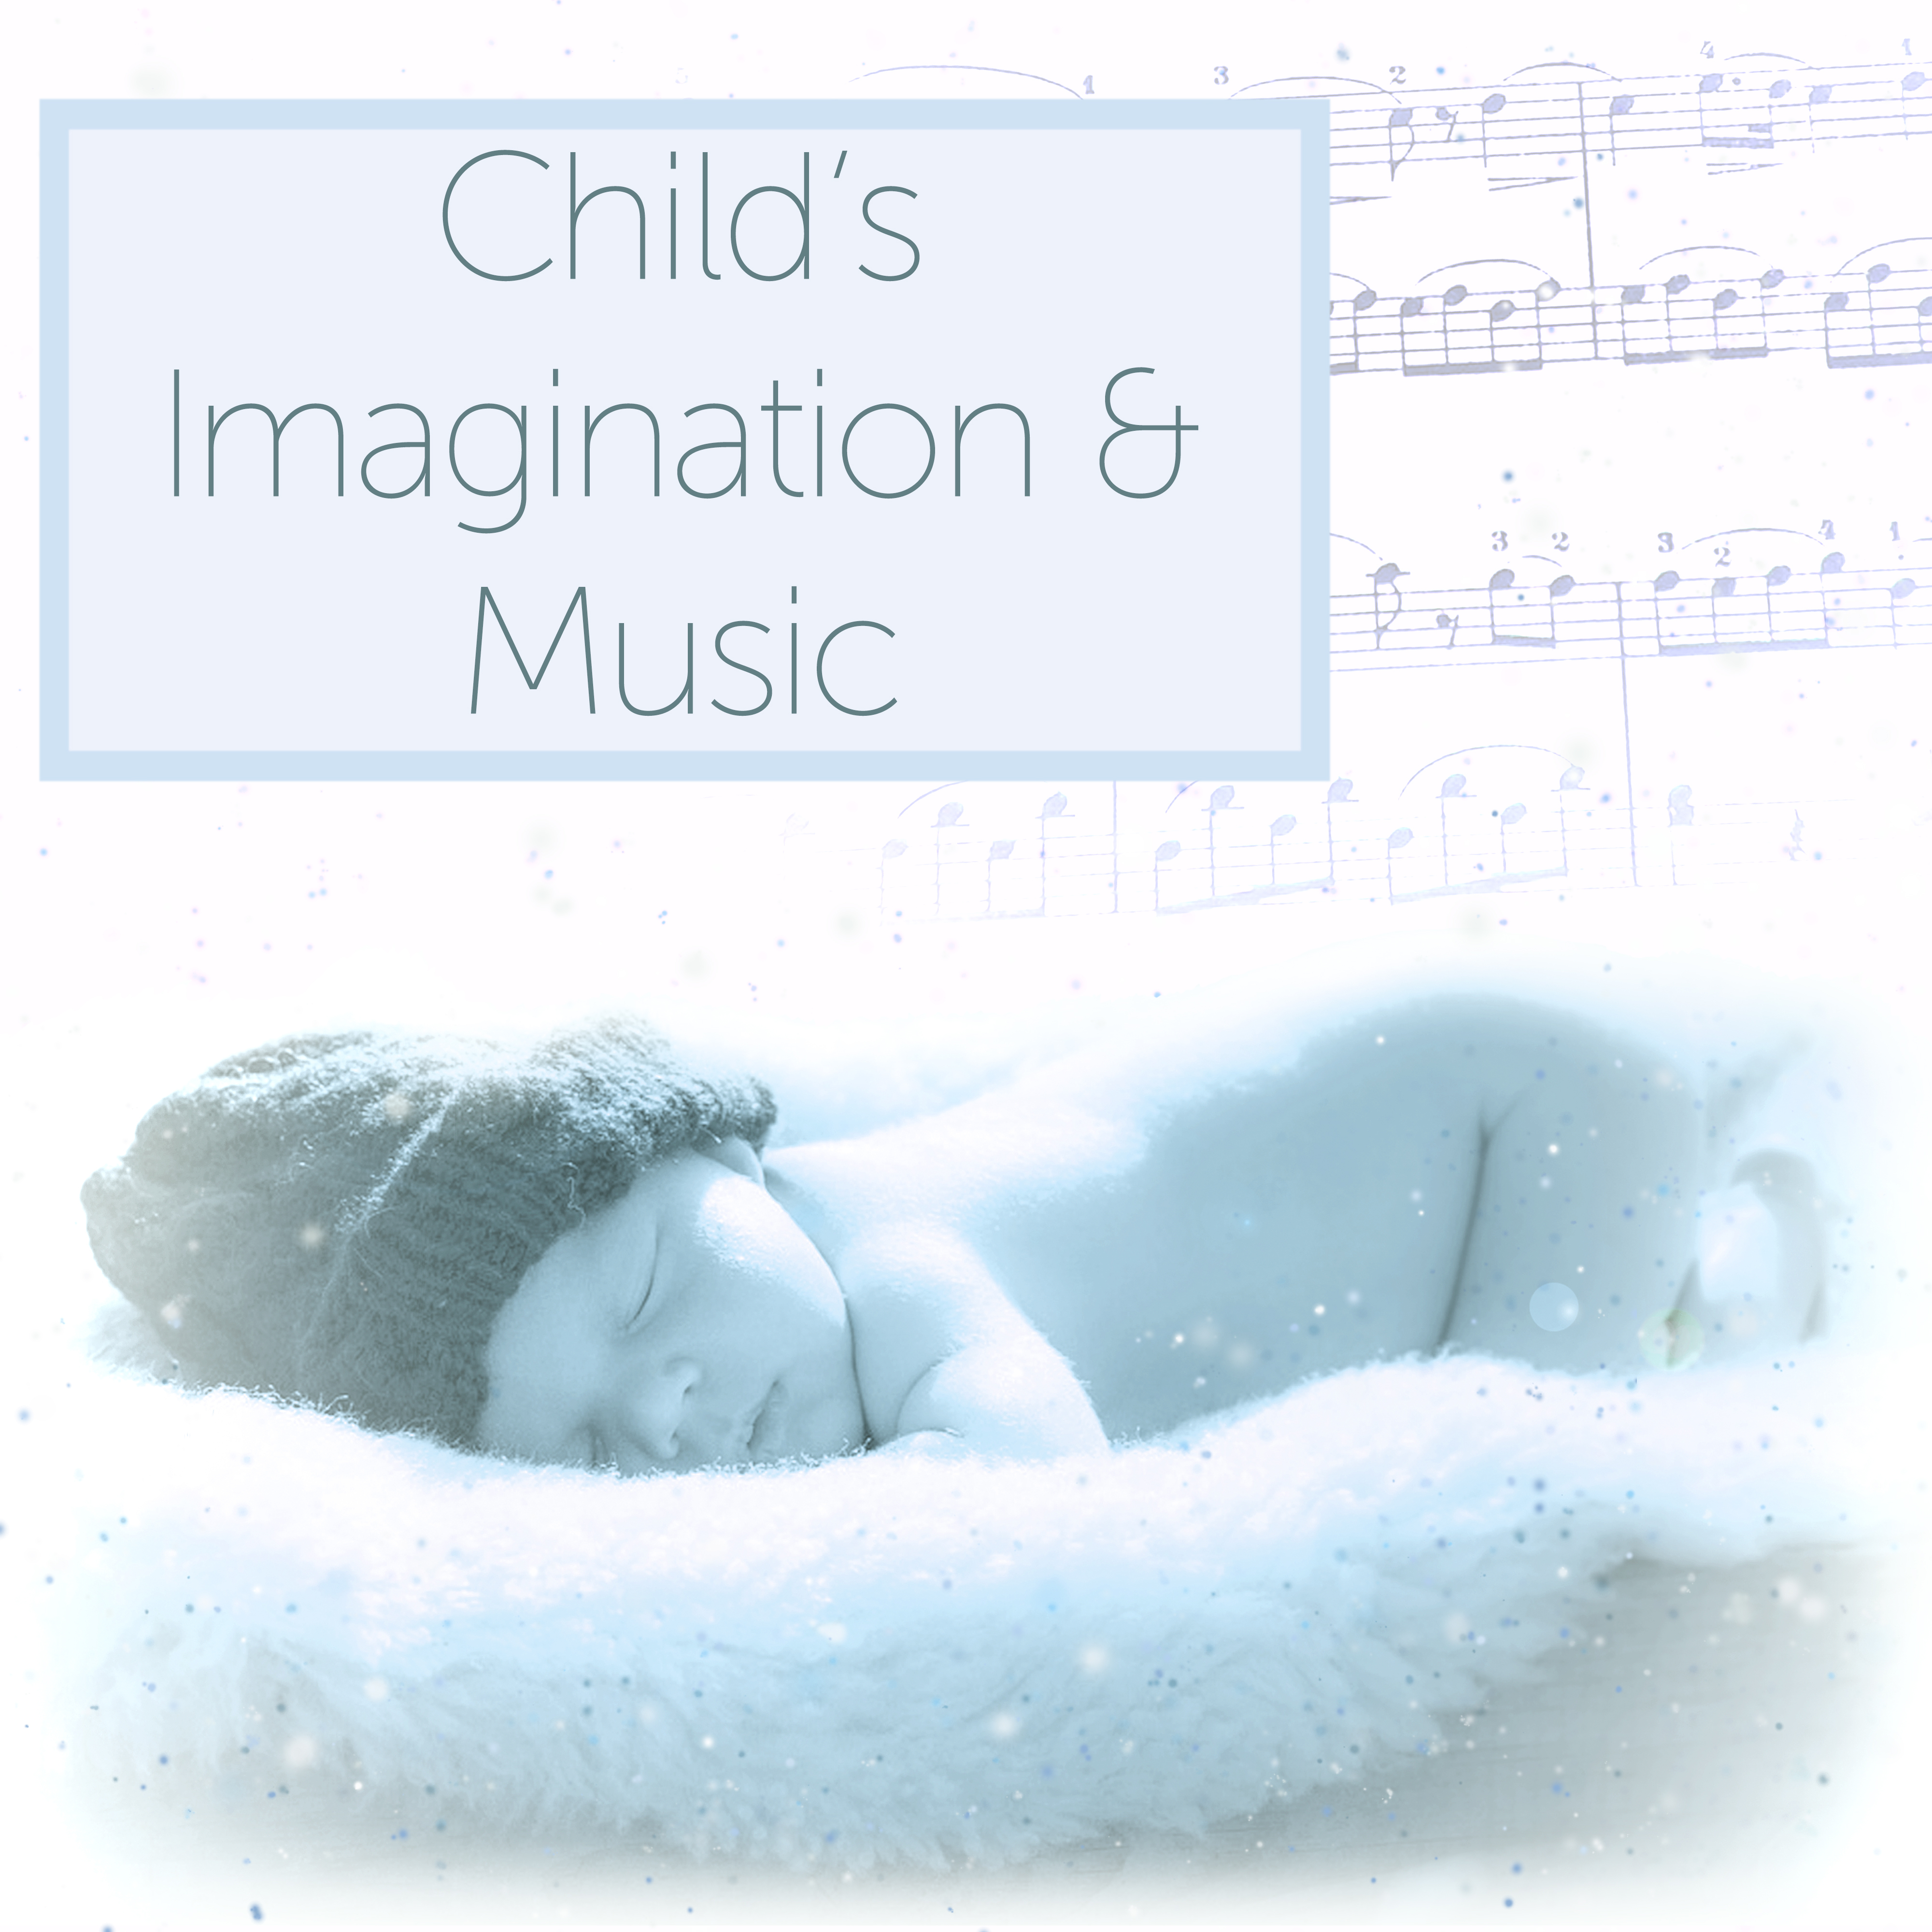 Child' s Imagination  Music  Classical Music for Baby, Development Child, Smart Little Kid, Mozart, Beethoven